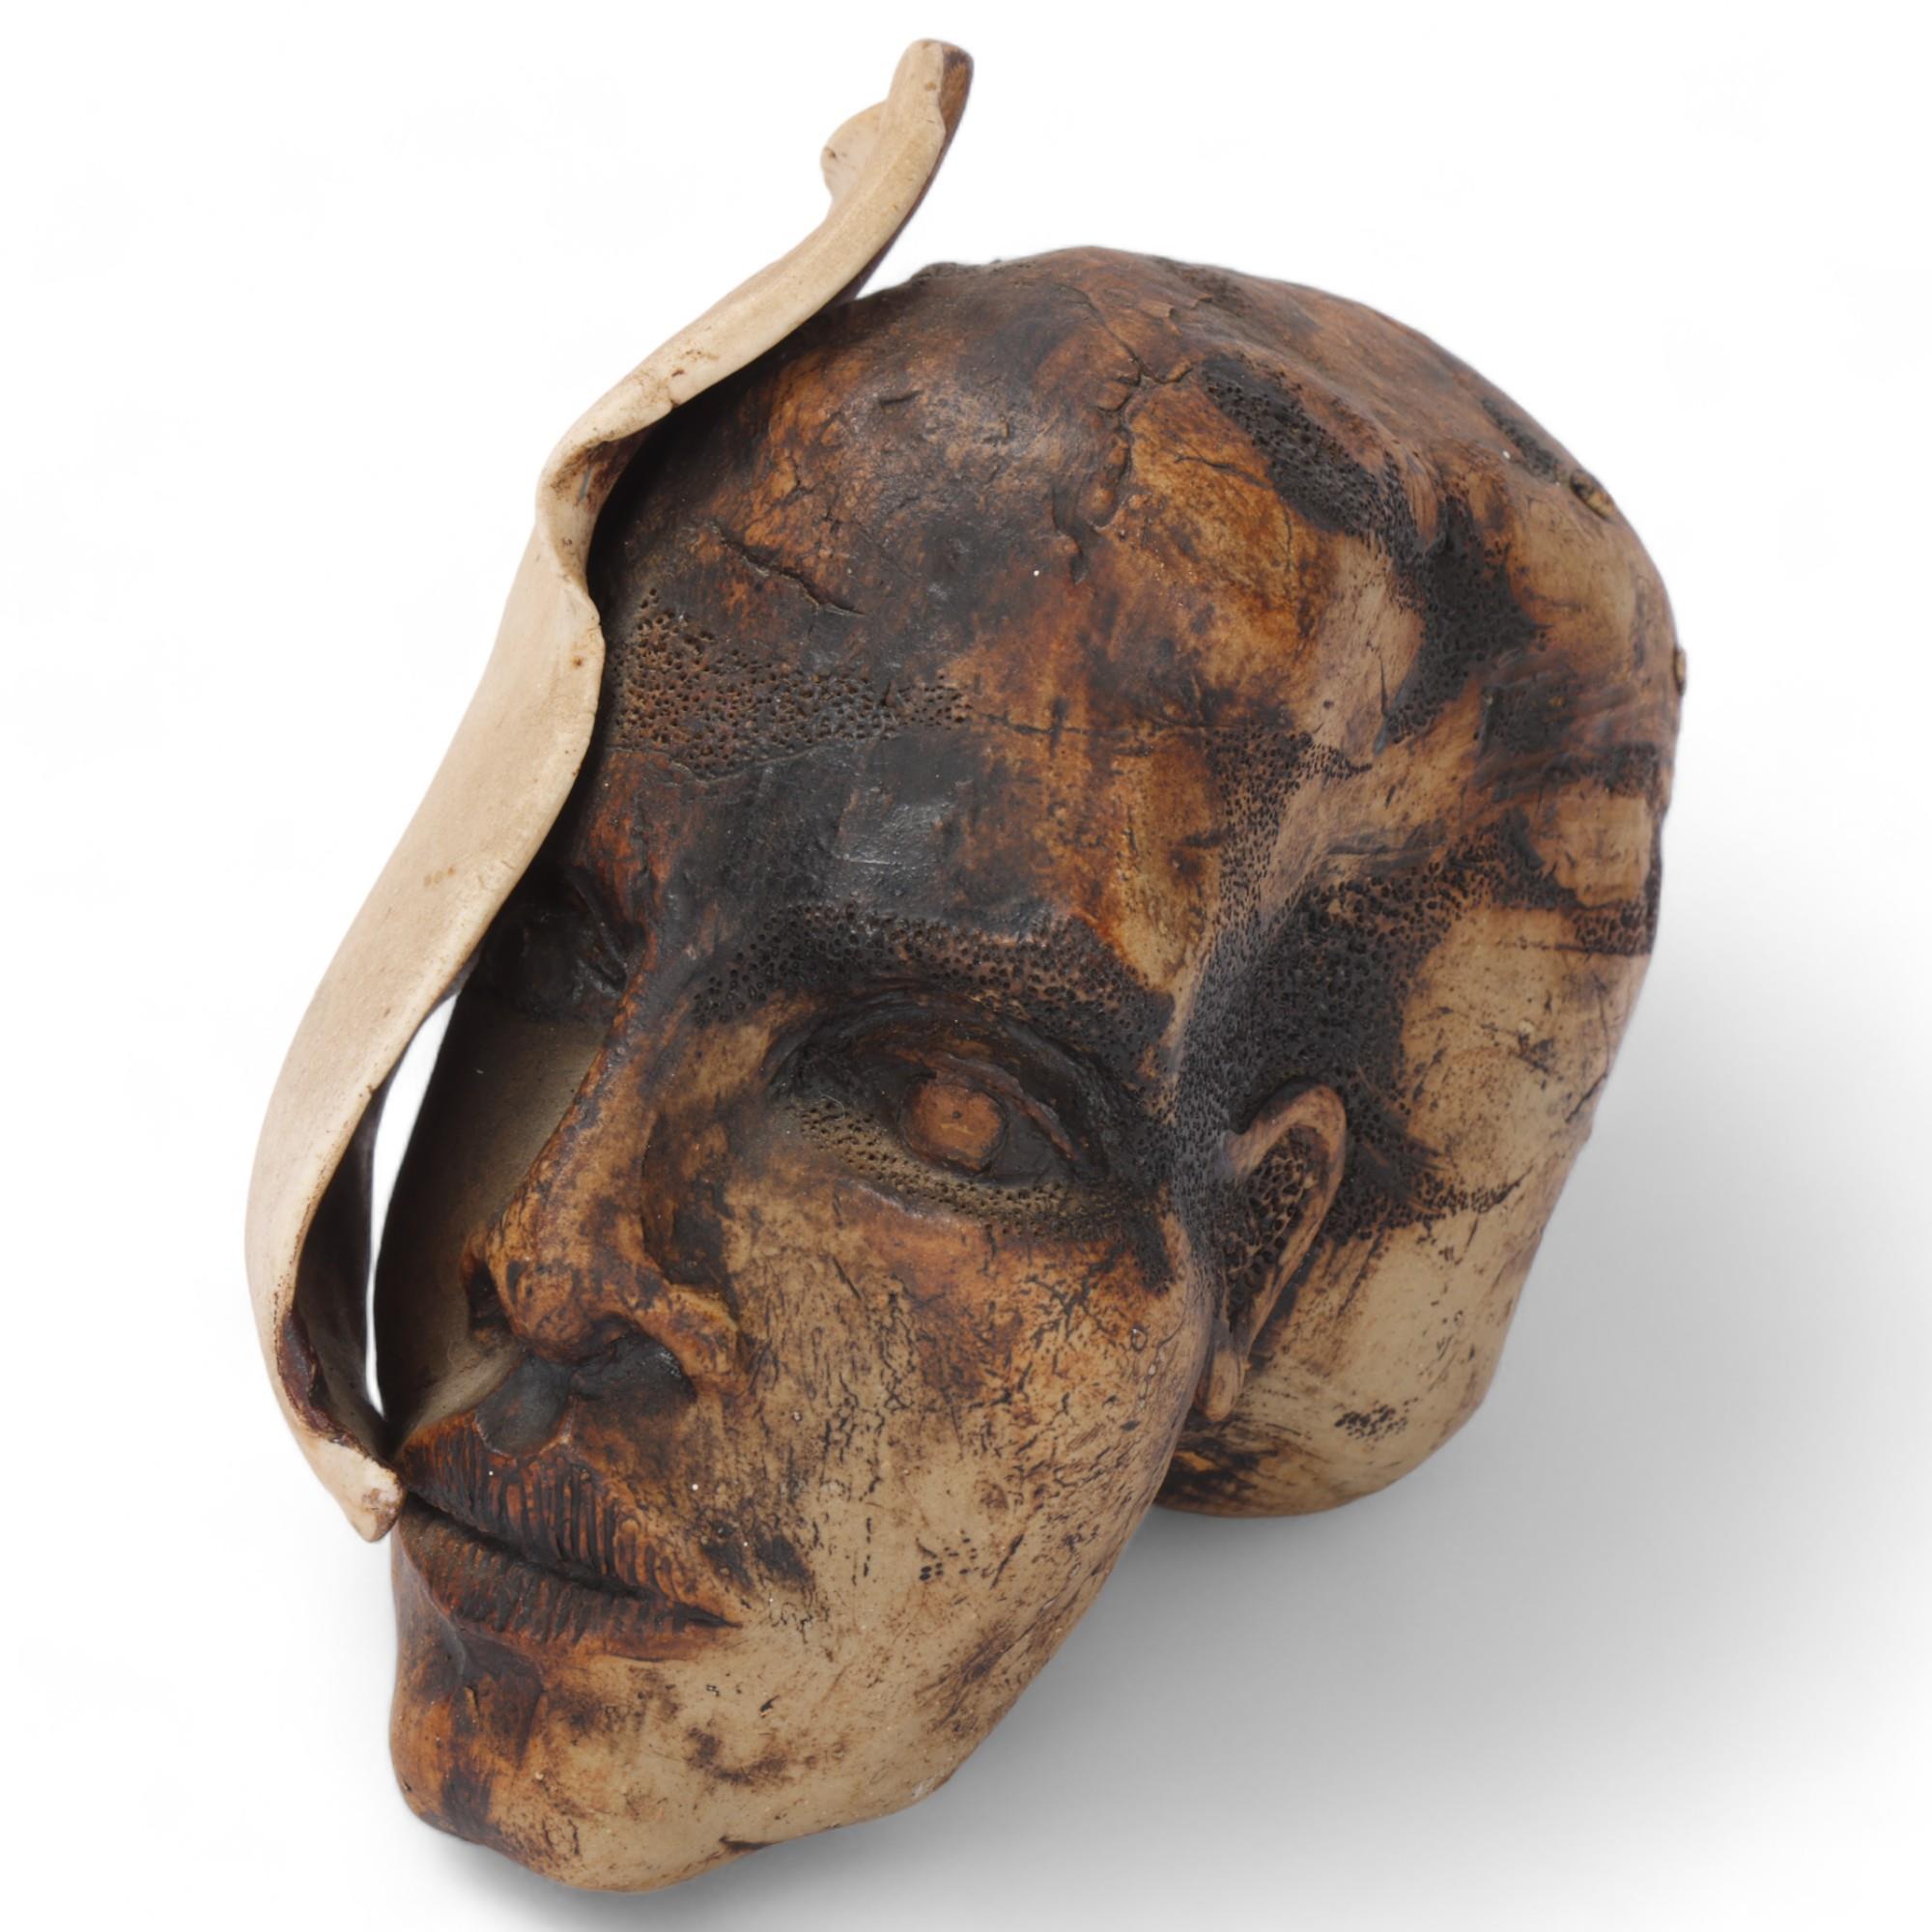 A South African ceramic sculpture depicting the calcification of the ear in deep sea diving,